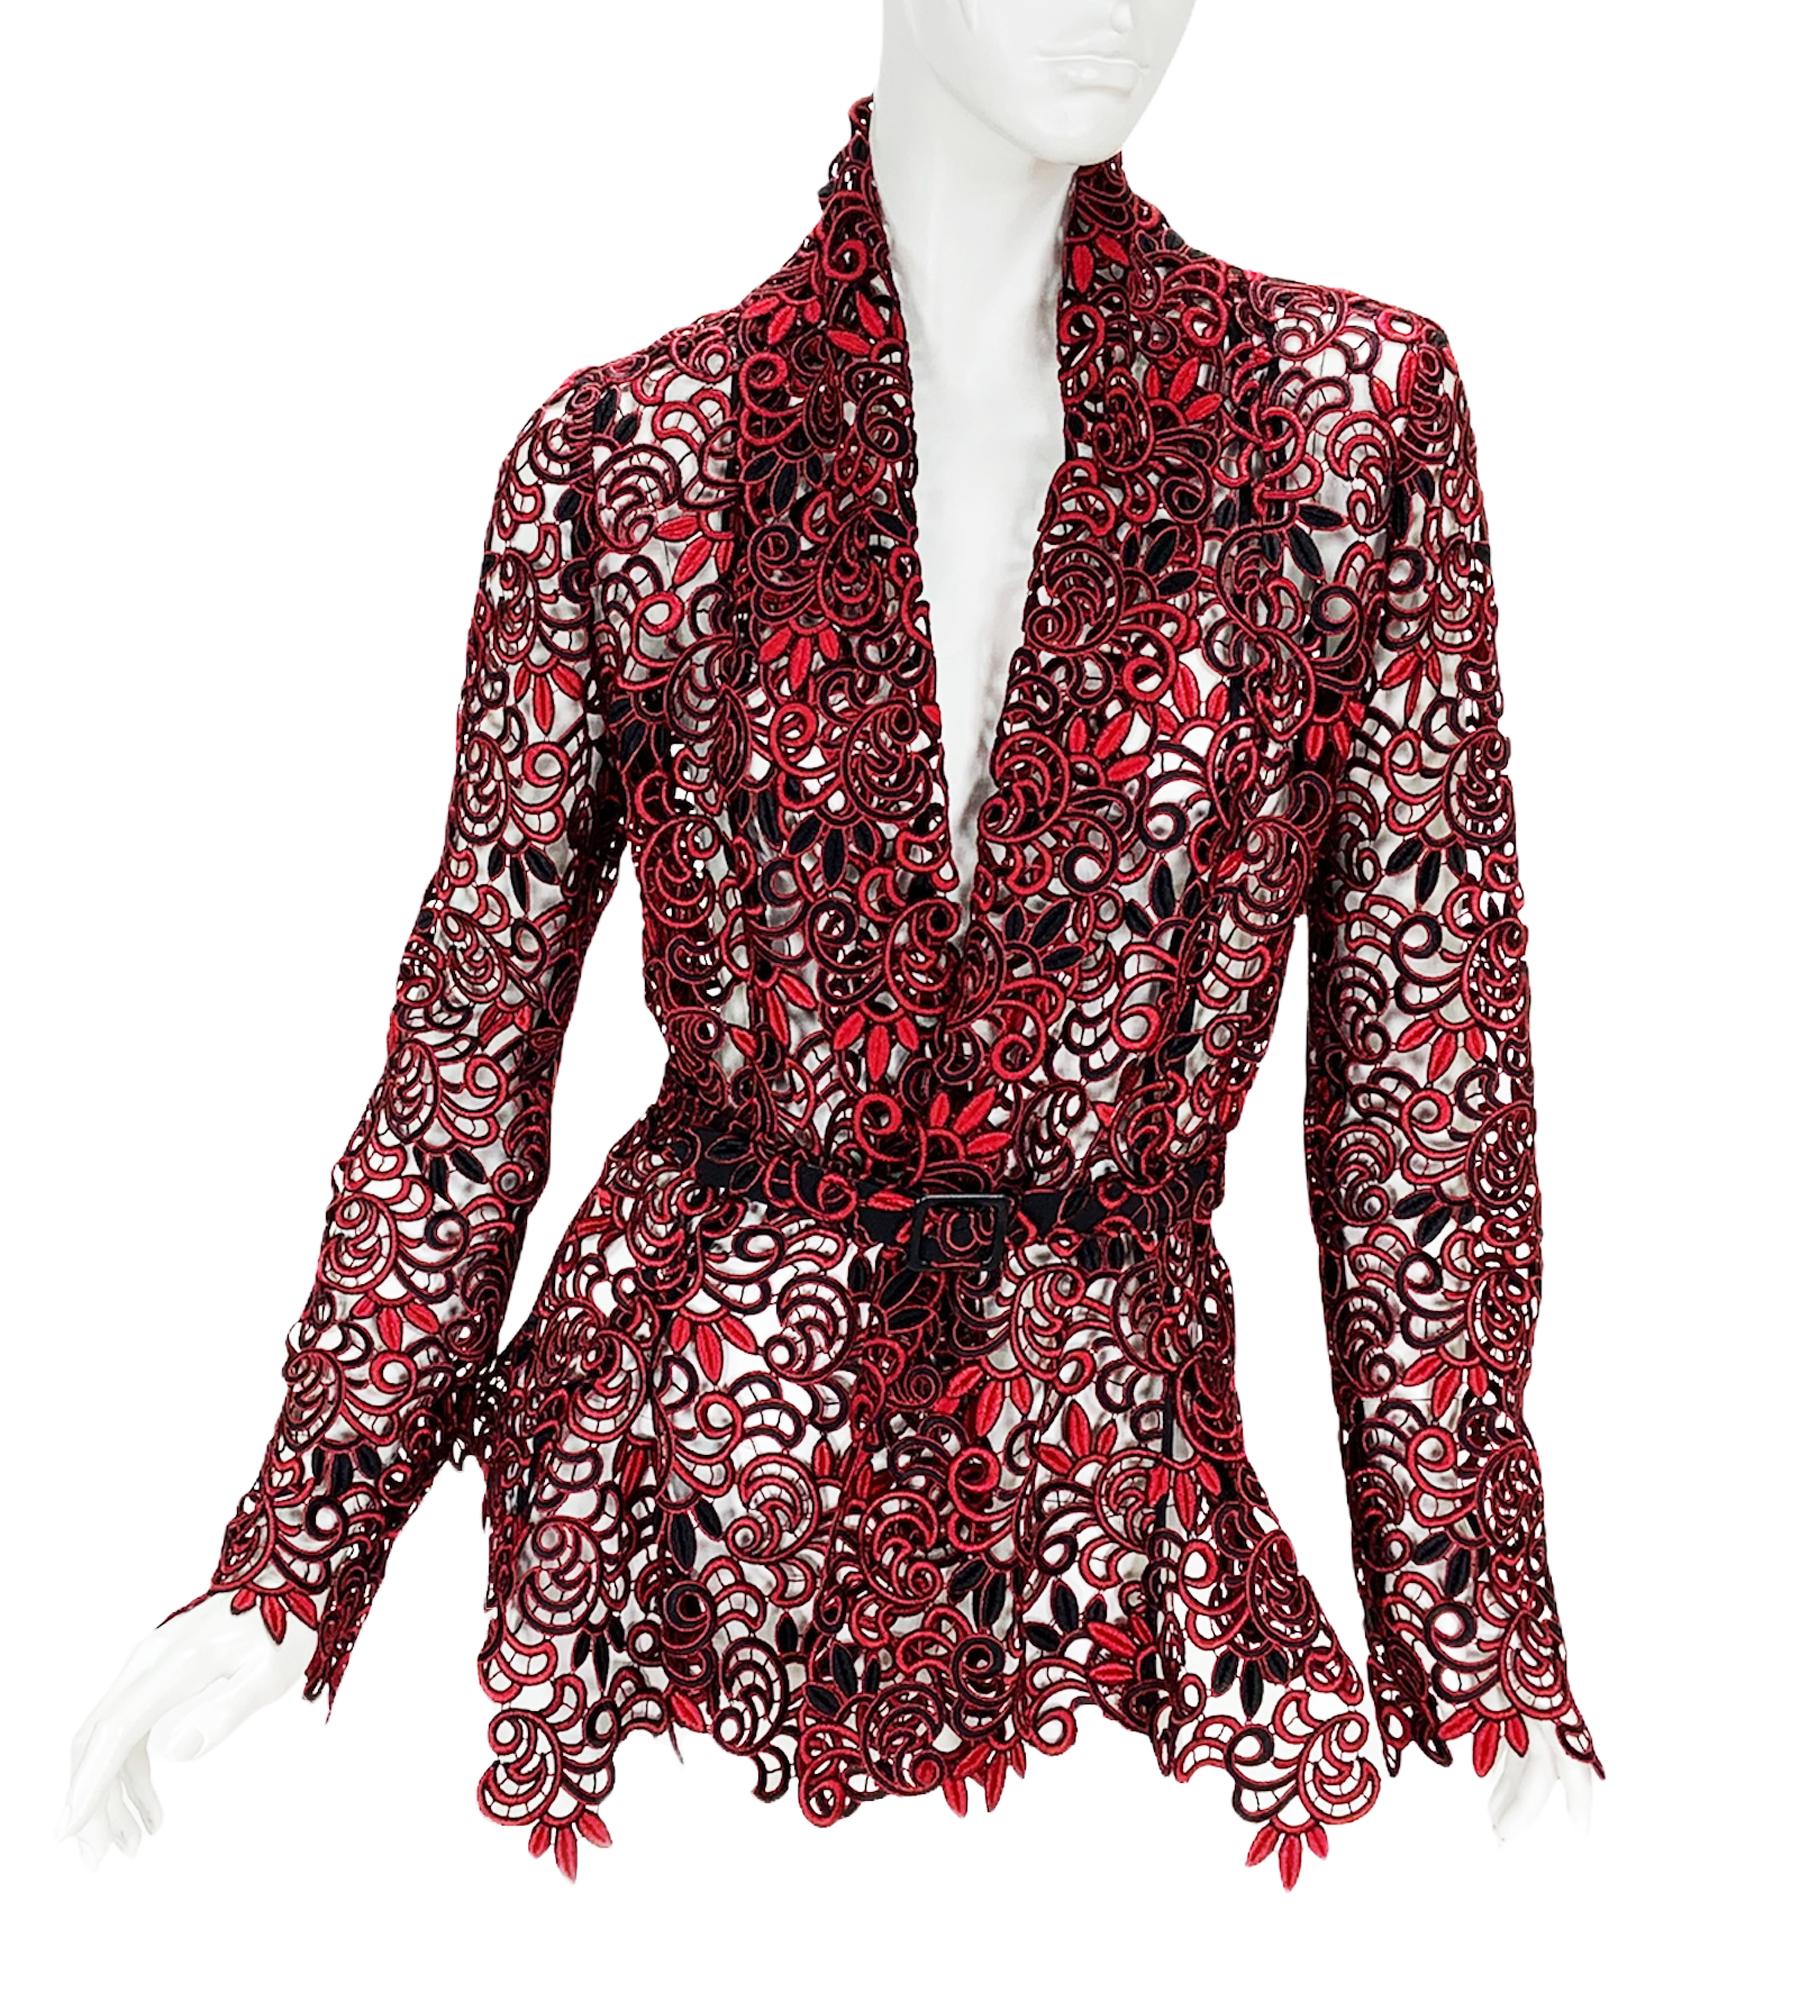 New Oscar De La Renta Lace Belted Jacket Blazer
F/W 2014 - Last Oscar De La Renta Collection Created Maestro by Himself !!!
US size - 6
Amazing French Lace in Ruby Red Color Combined Together with Classic Black Creates a Very Rich Look.
One Hook